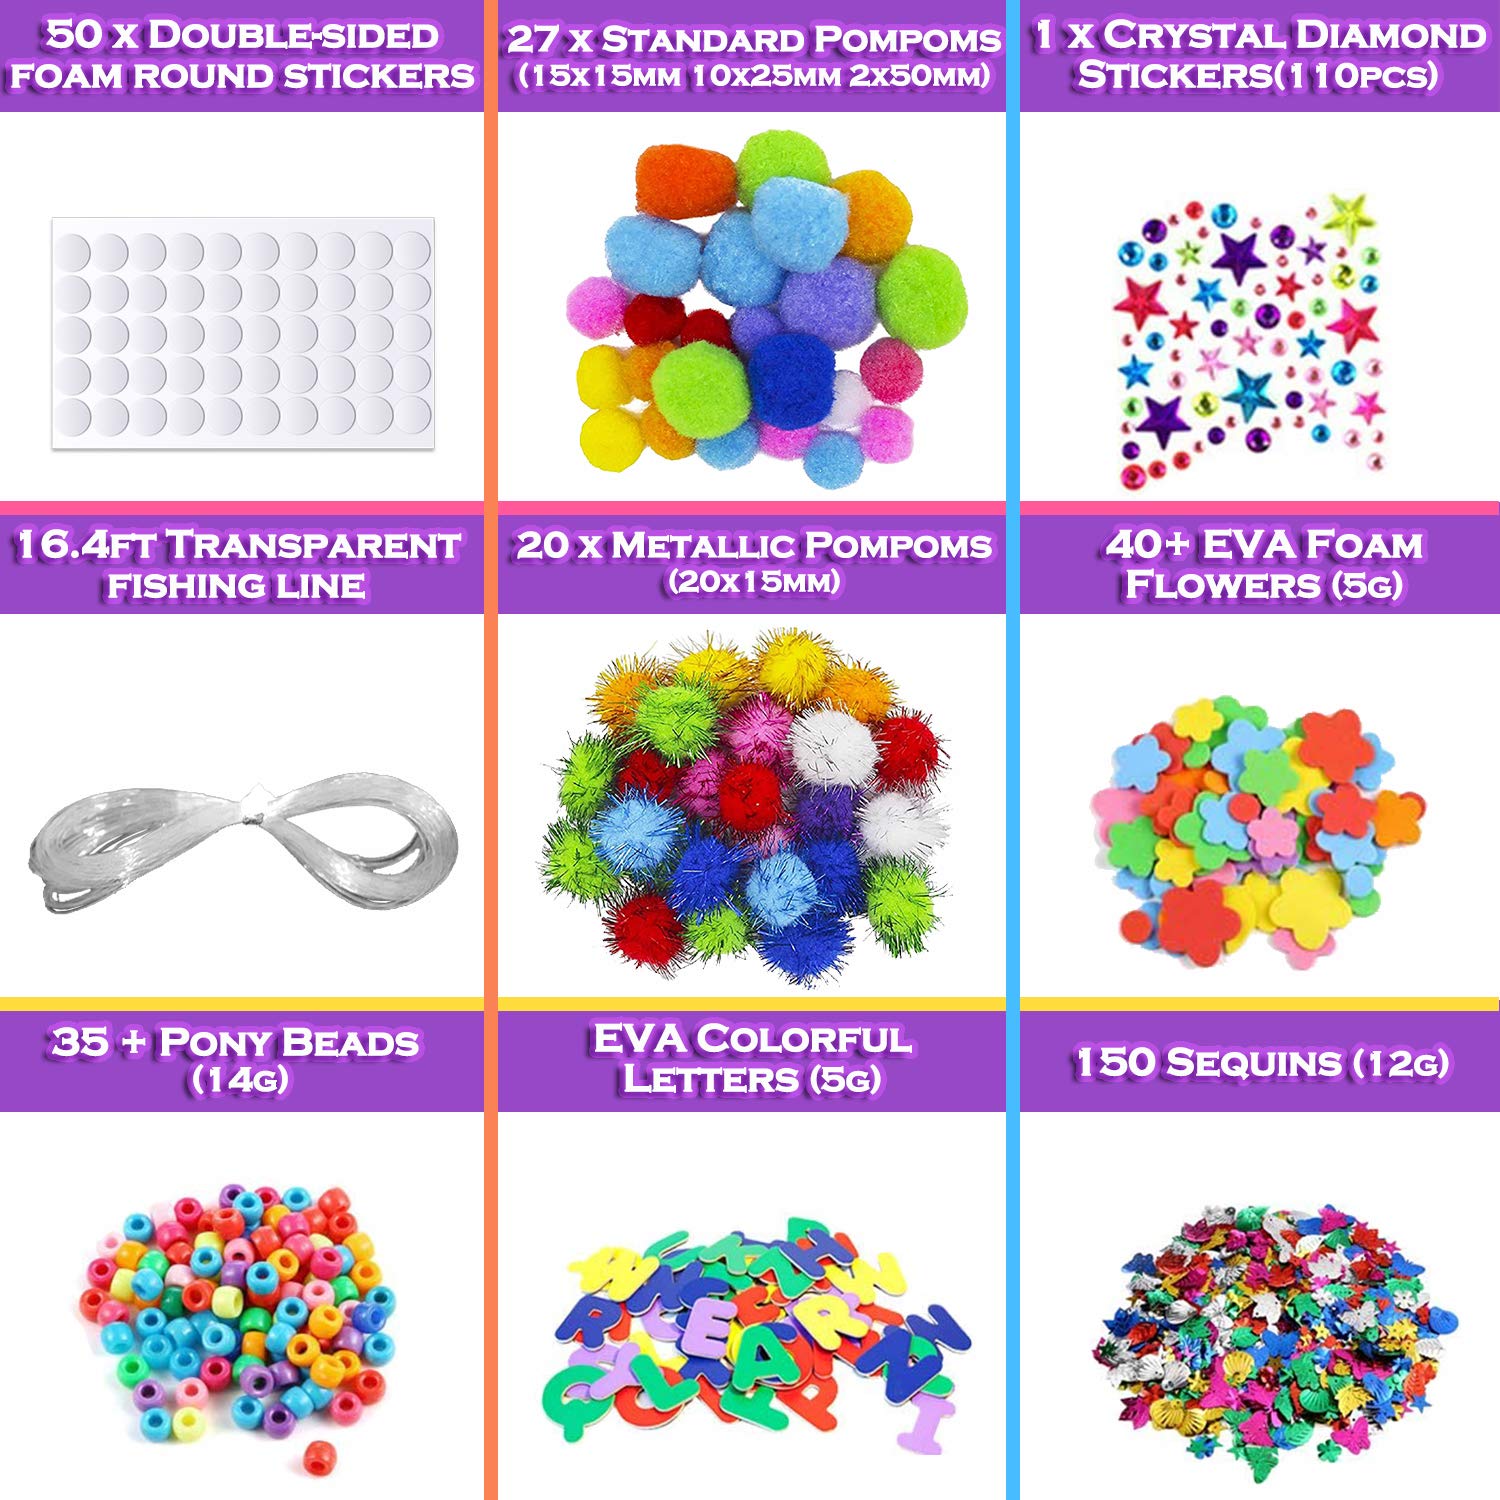 MOISO Mega Kids Crafts and Art Supplies Jar Kit - 550+ Piece Set - Make Bracelets and Necklaces - Plus Glitter Glue, Construction Paper, Colored Popsicle Sticks, Google Eyes, Pipe Cleaners